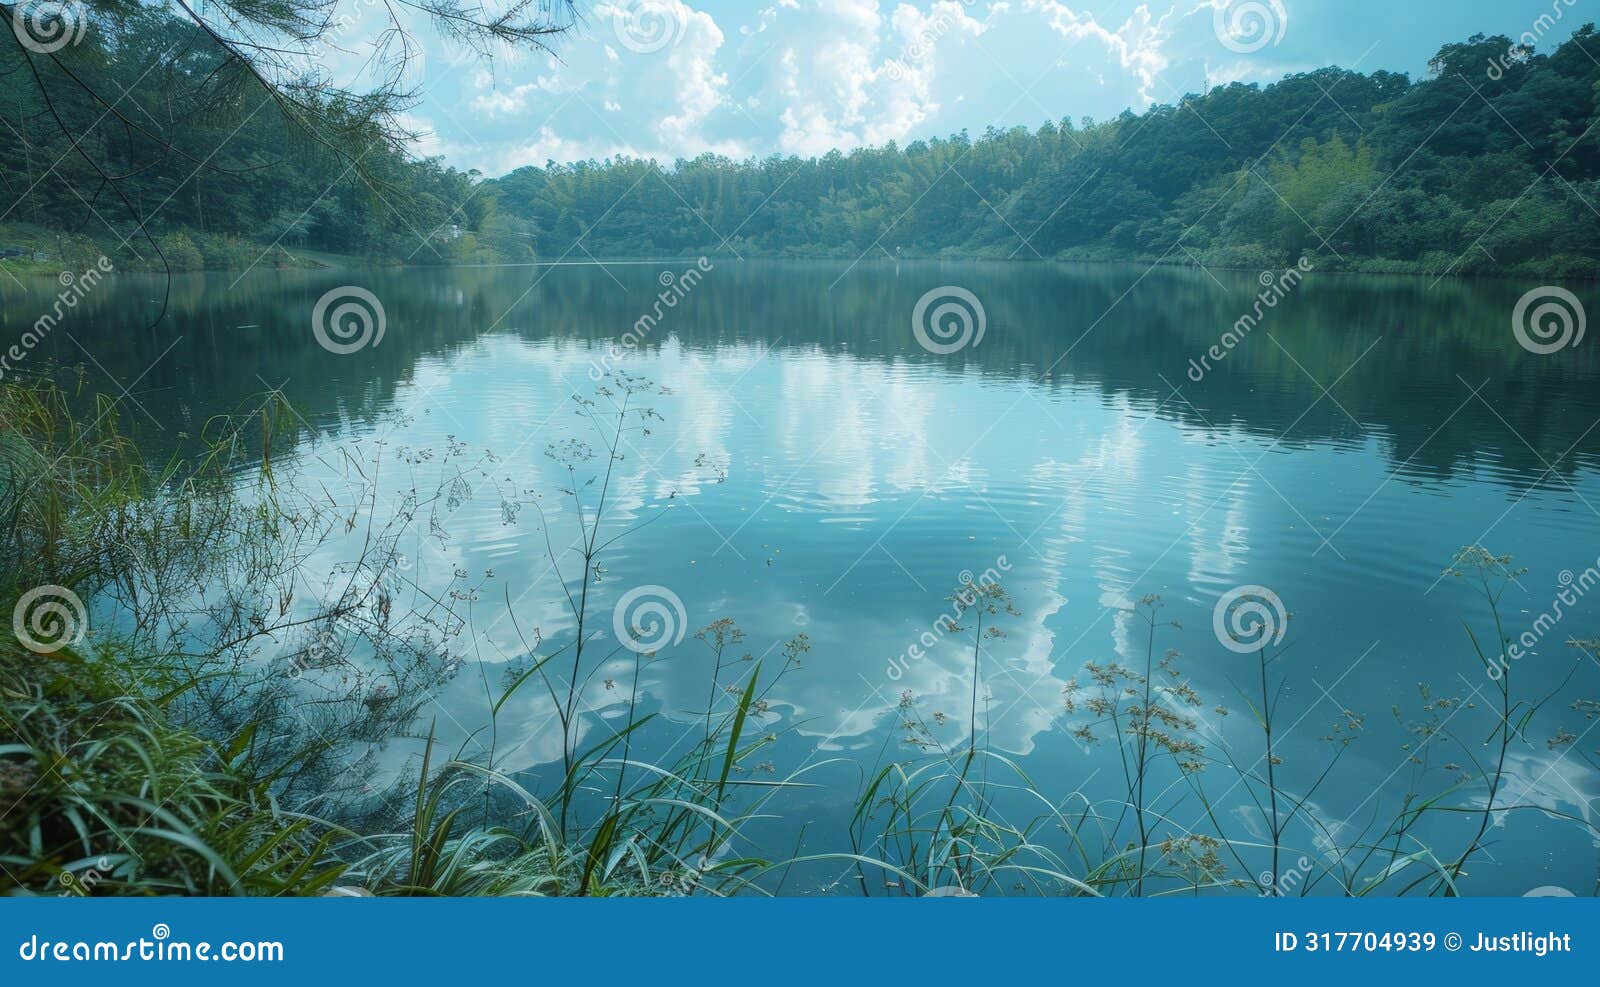 the stillness of the lake giving a sense of calm and allowing for deep introspection